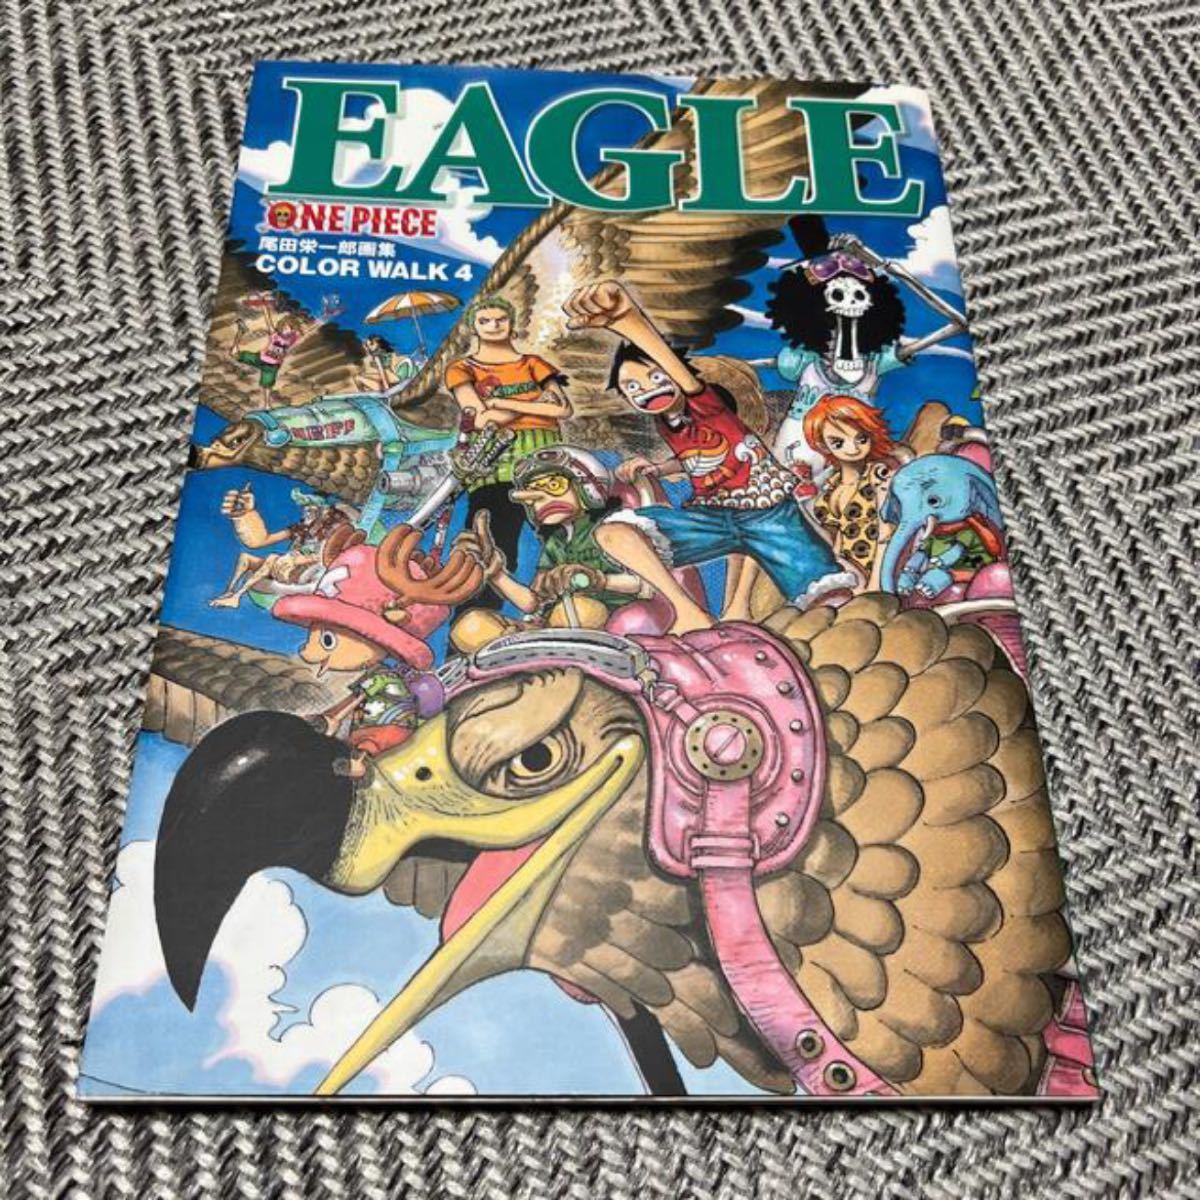 PayPayフリマ｜ONE PIECE 画集 尾田栄一郎 EAGLE